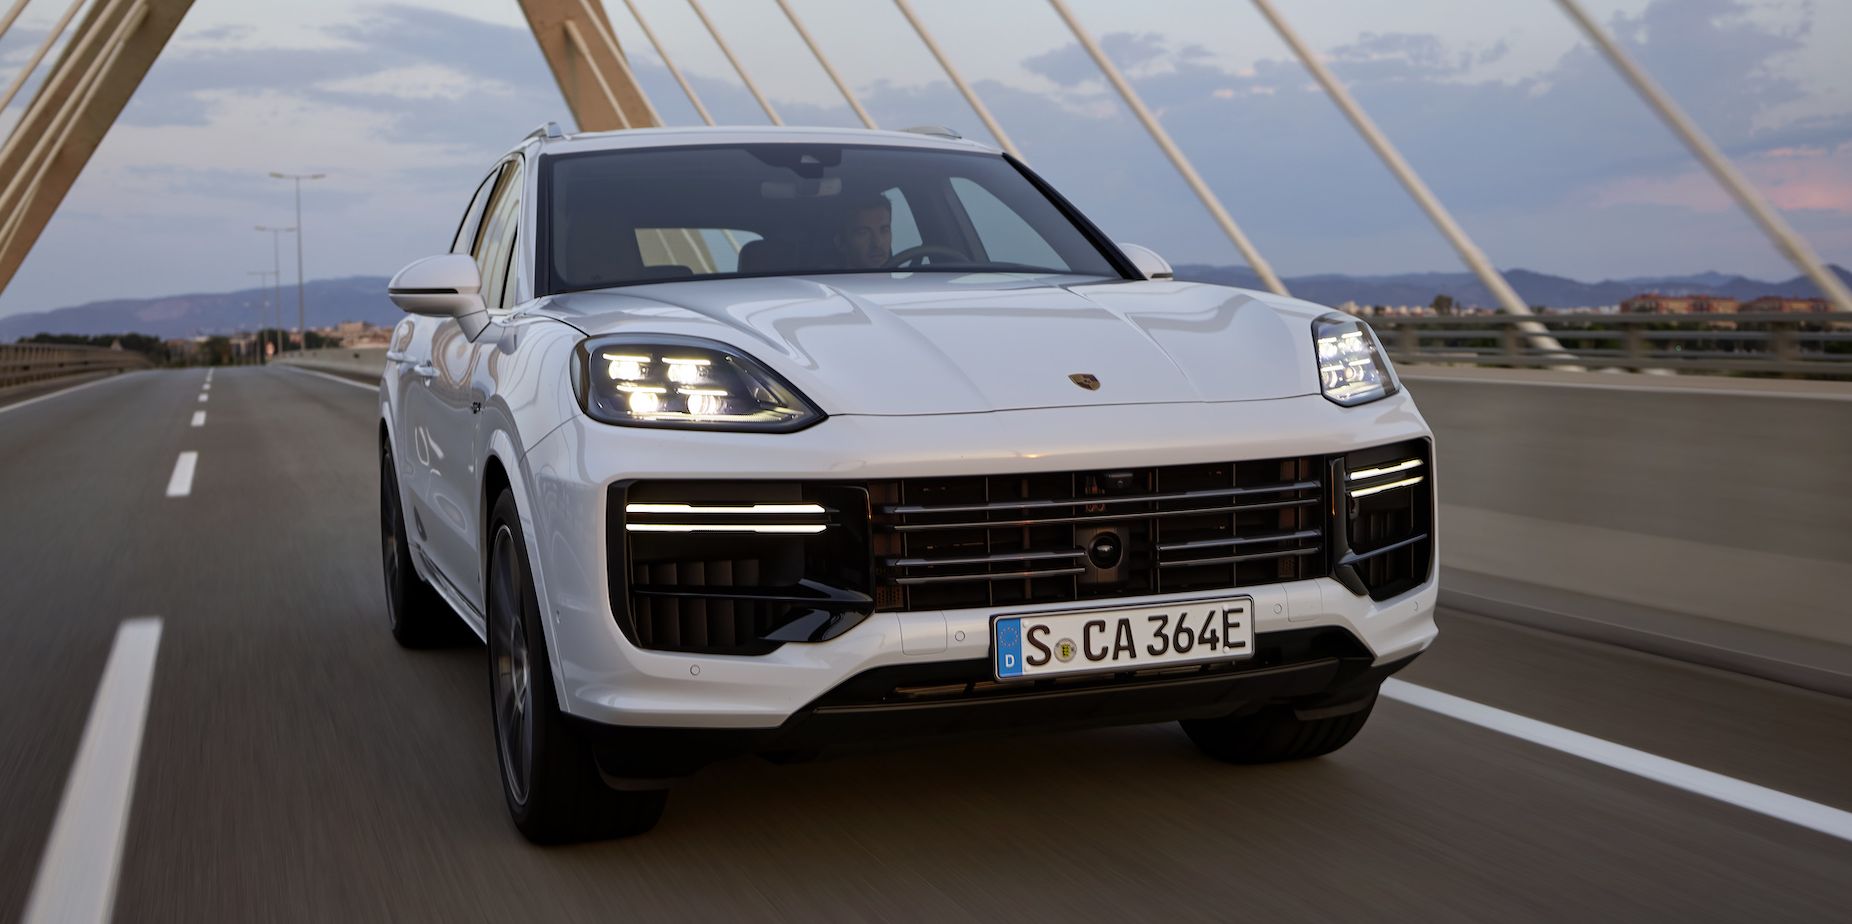 The 2024 Porsche Cayenne Turbo E-Hybrid Has 729 HP and 700 lb-ft of Torque